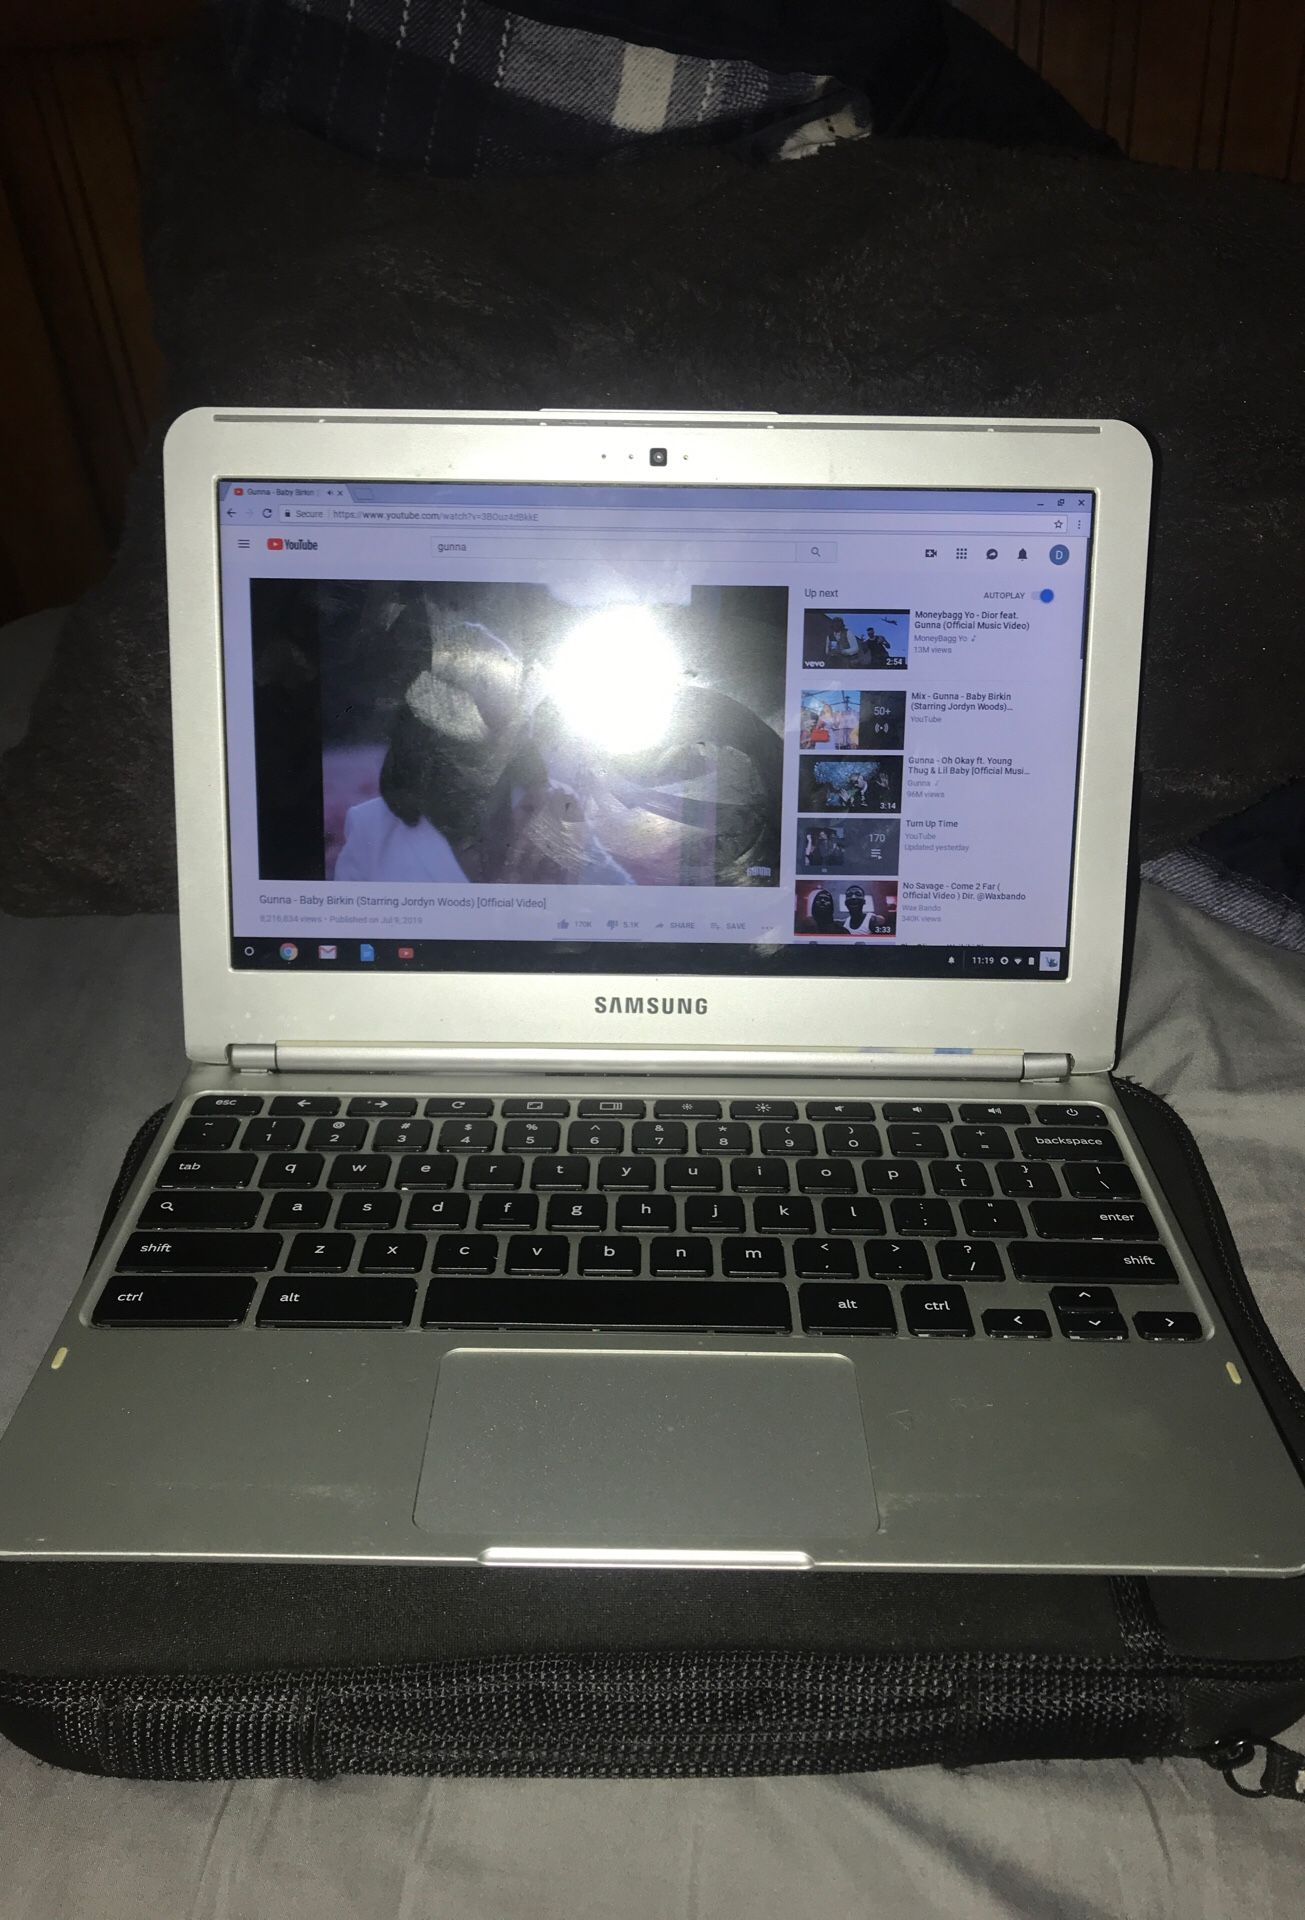 Google chrome computer everything works greats Good condition